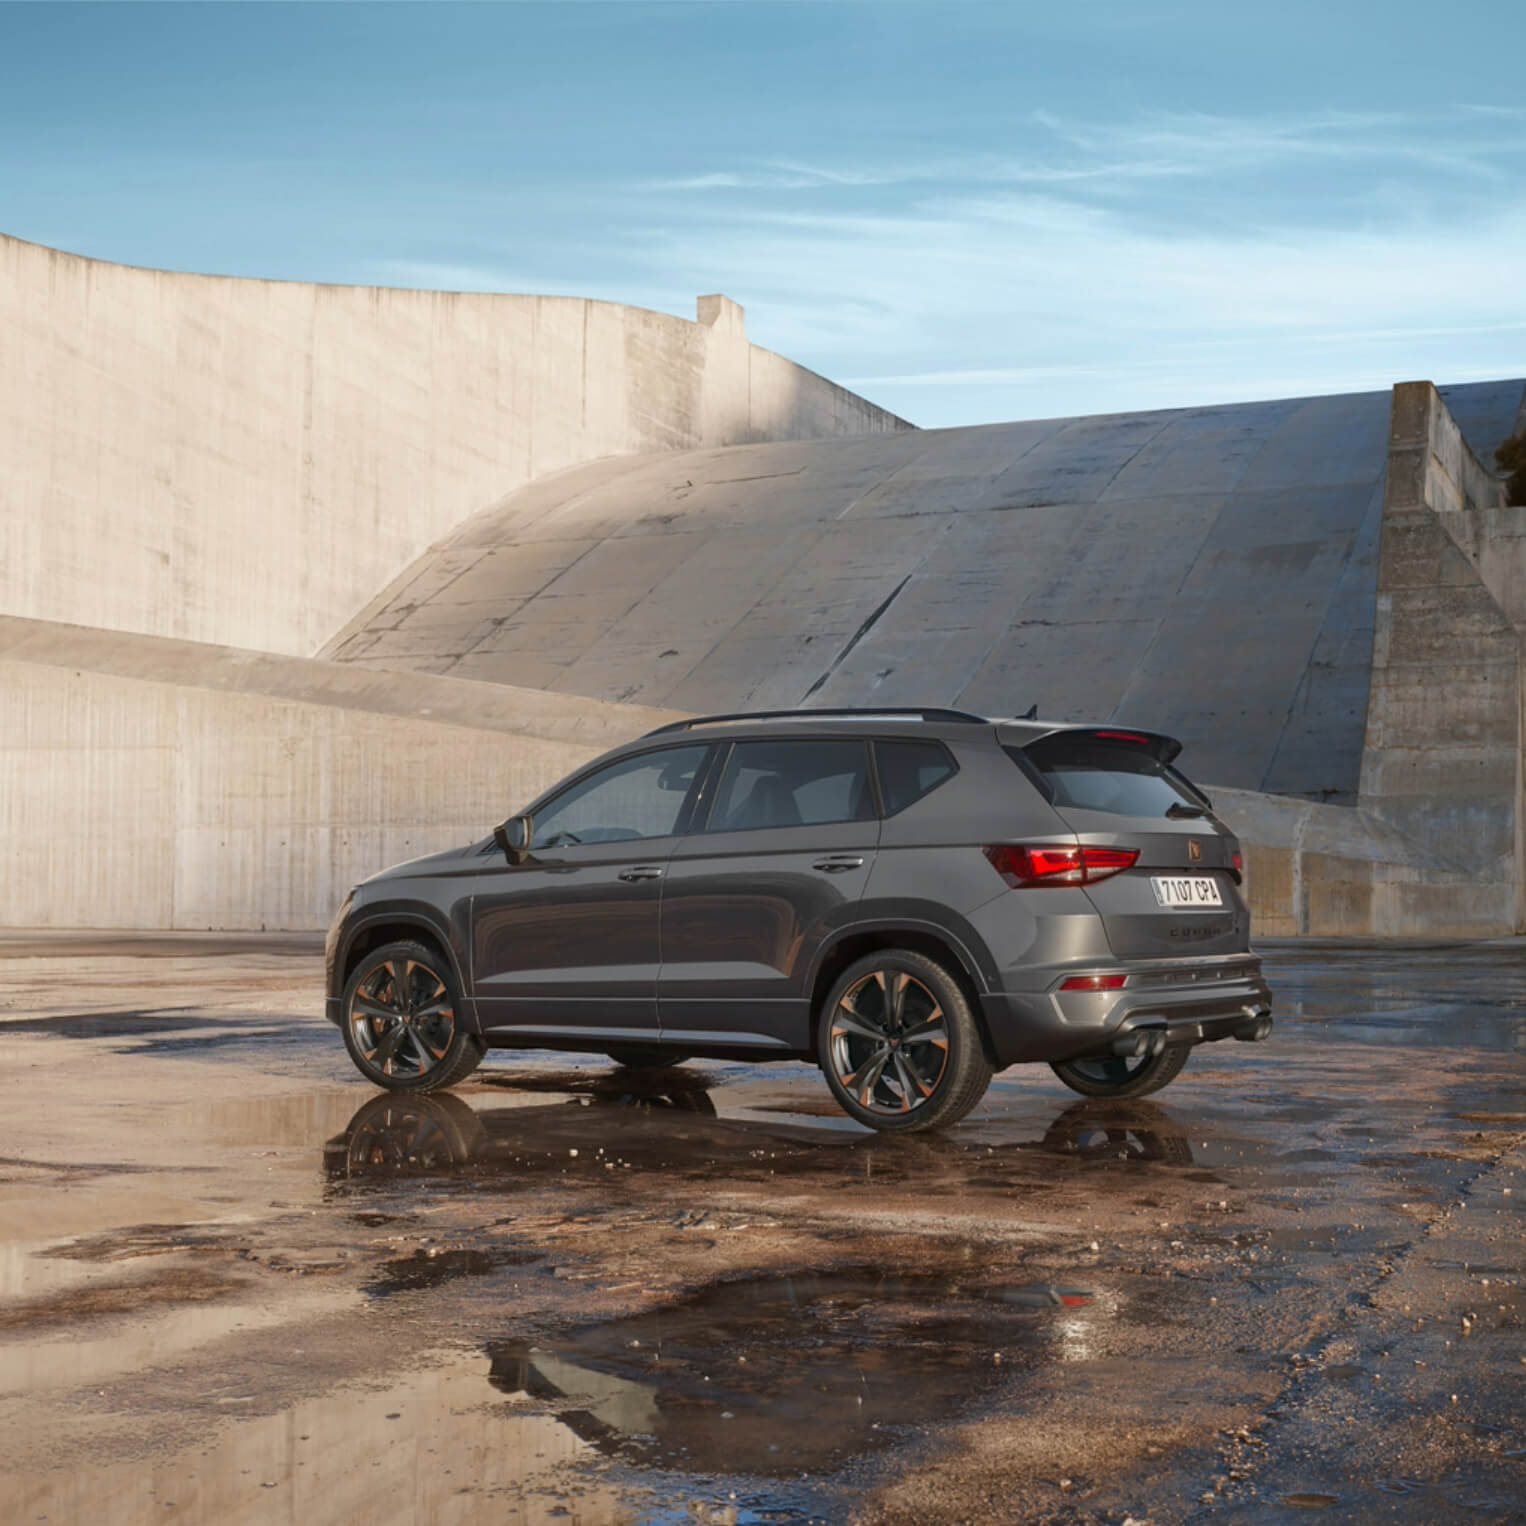 CUPRA Ateca voted Best Used Hot SUV by Carbuyer